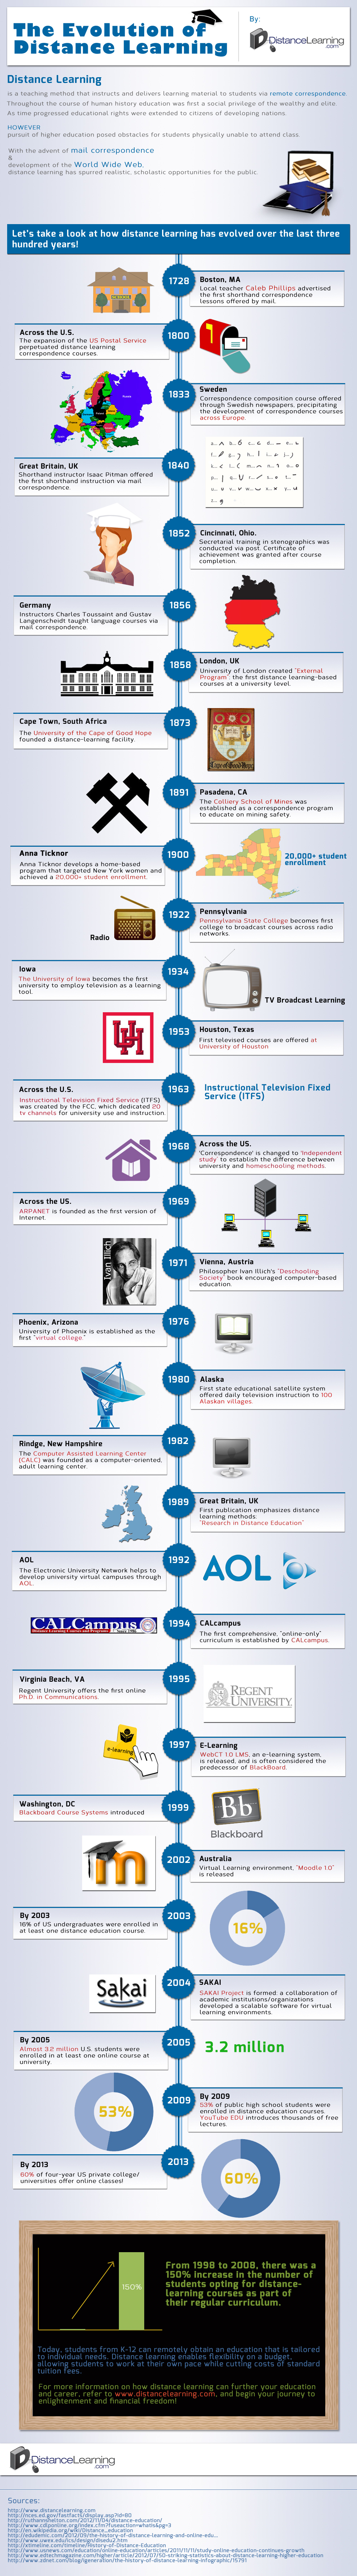 The Evolution of Distance Learning